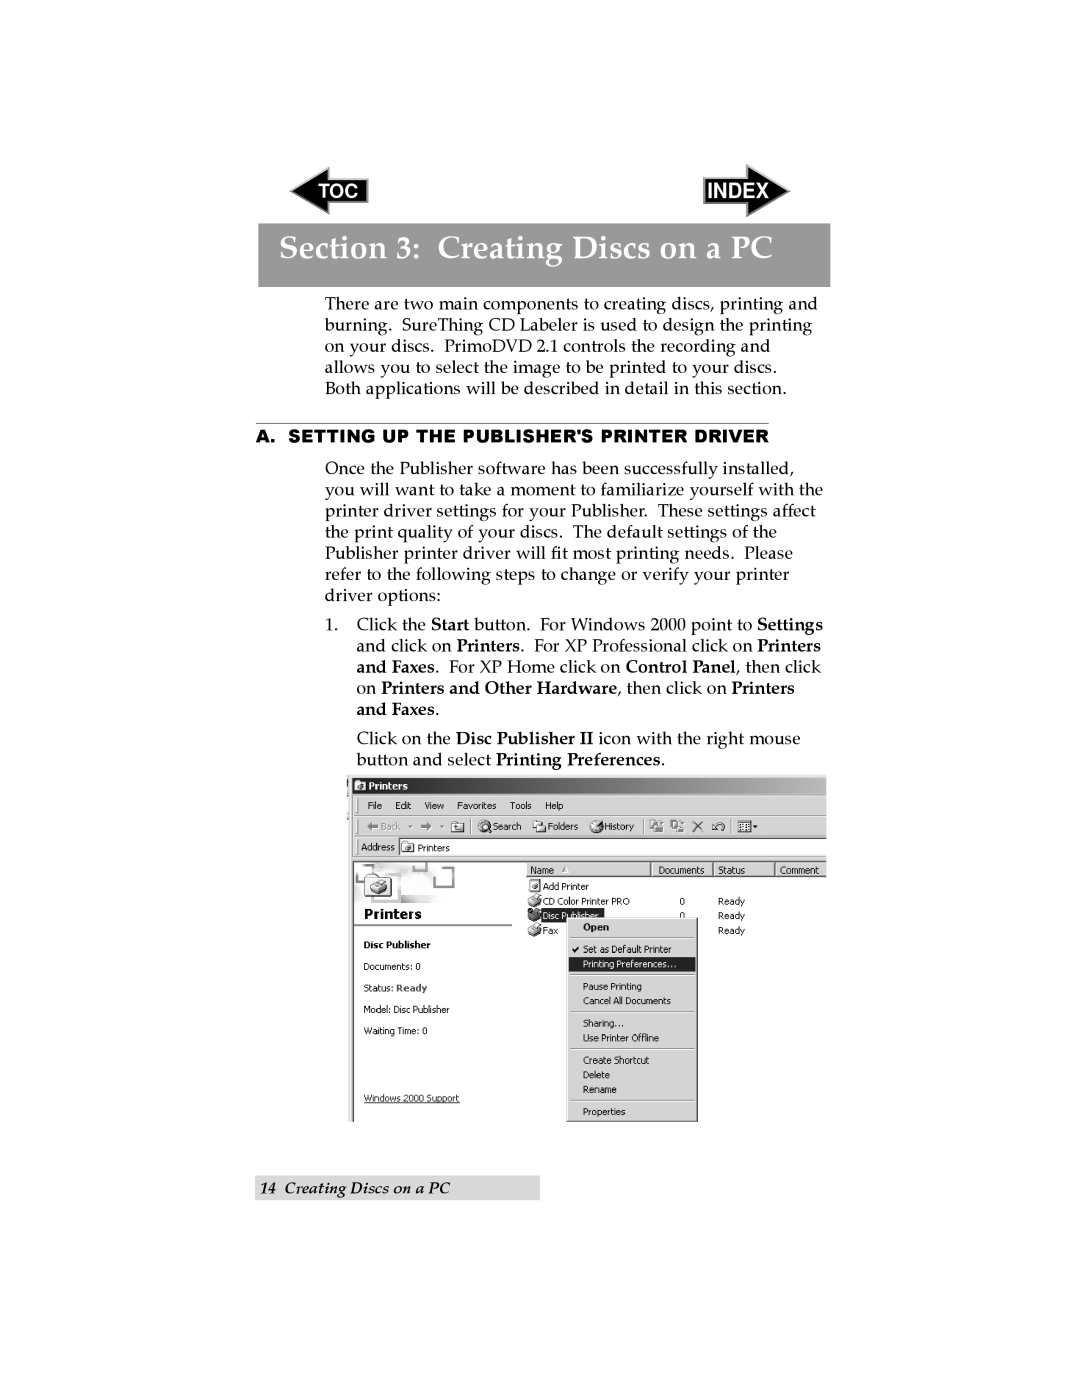 Primera Technology II user manual Creating Discs on a PC, Index, A. Setting Up The Publishers Printer Driver 